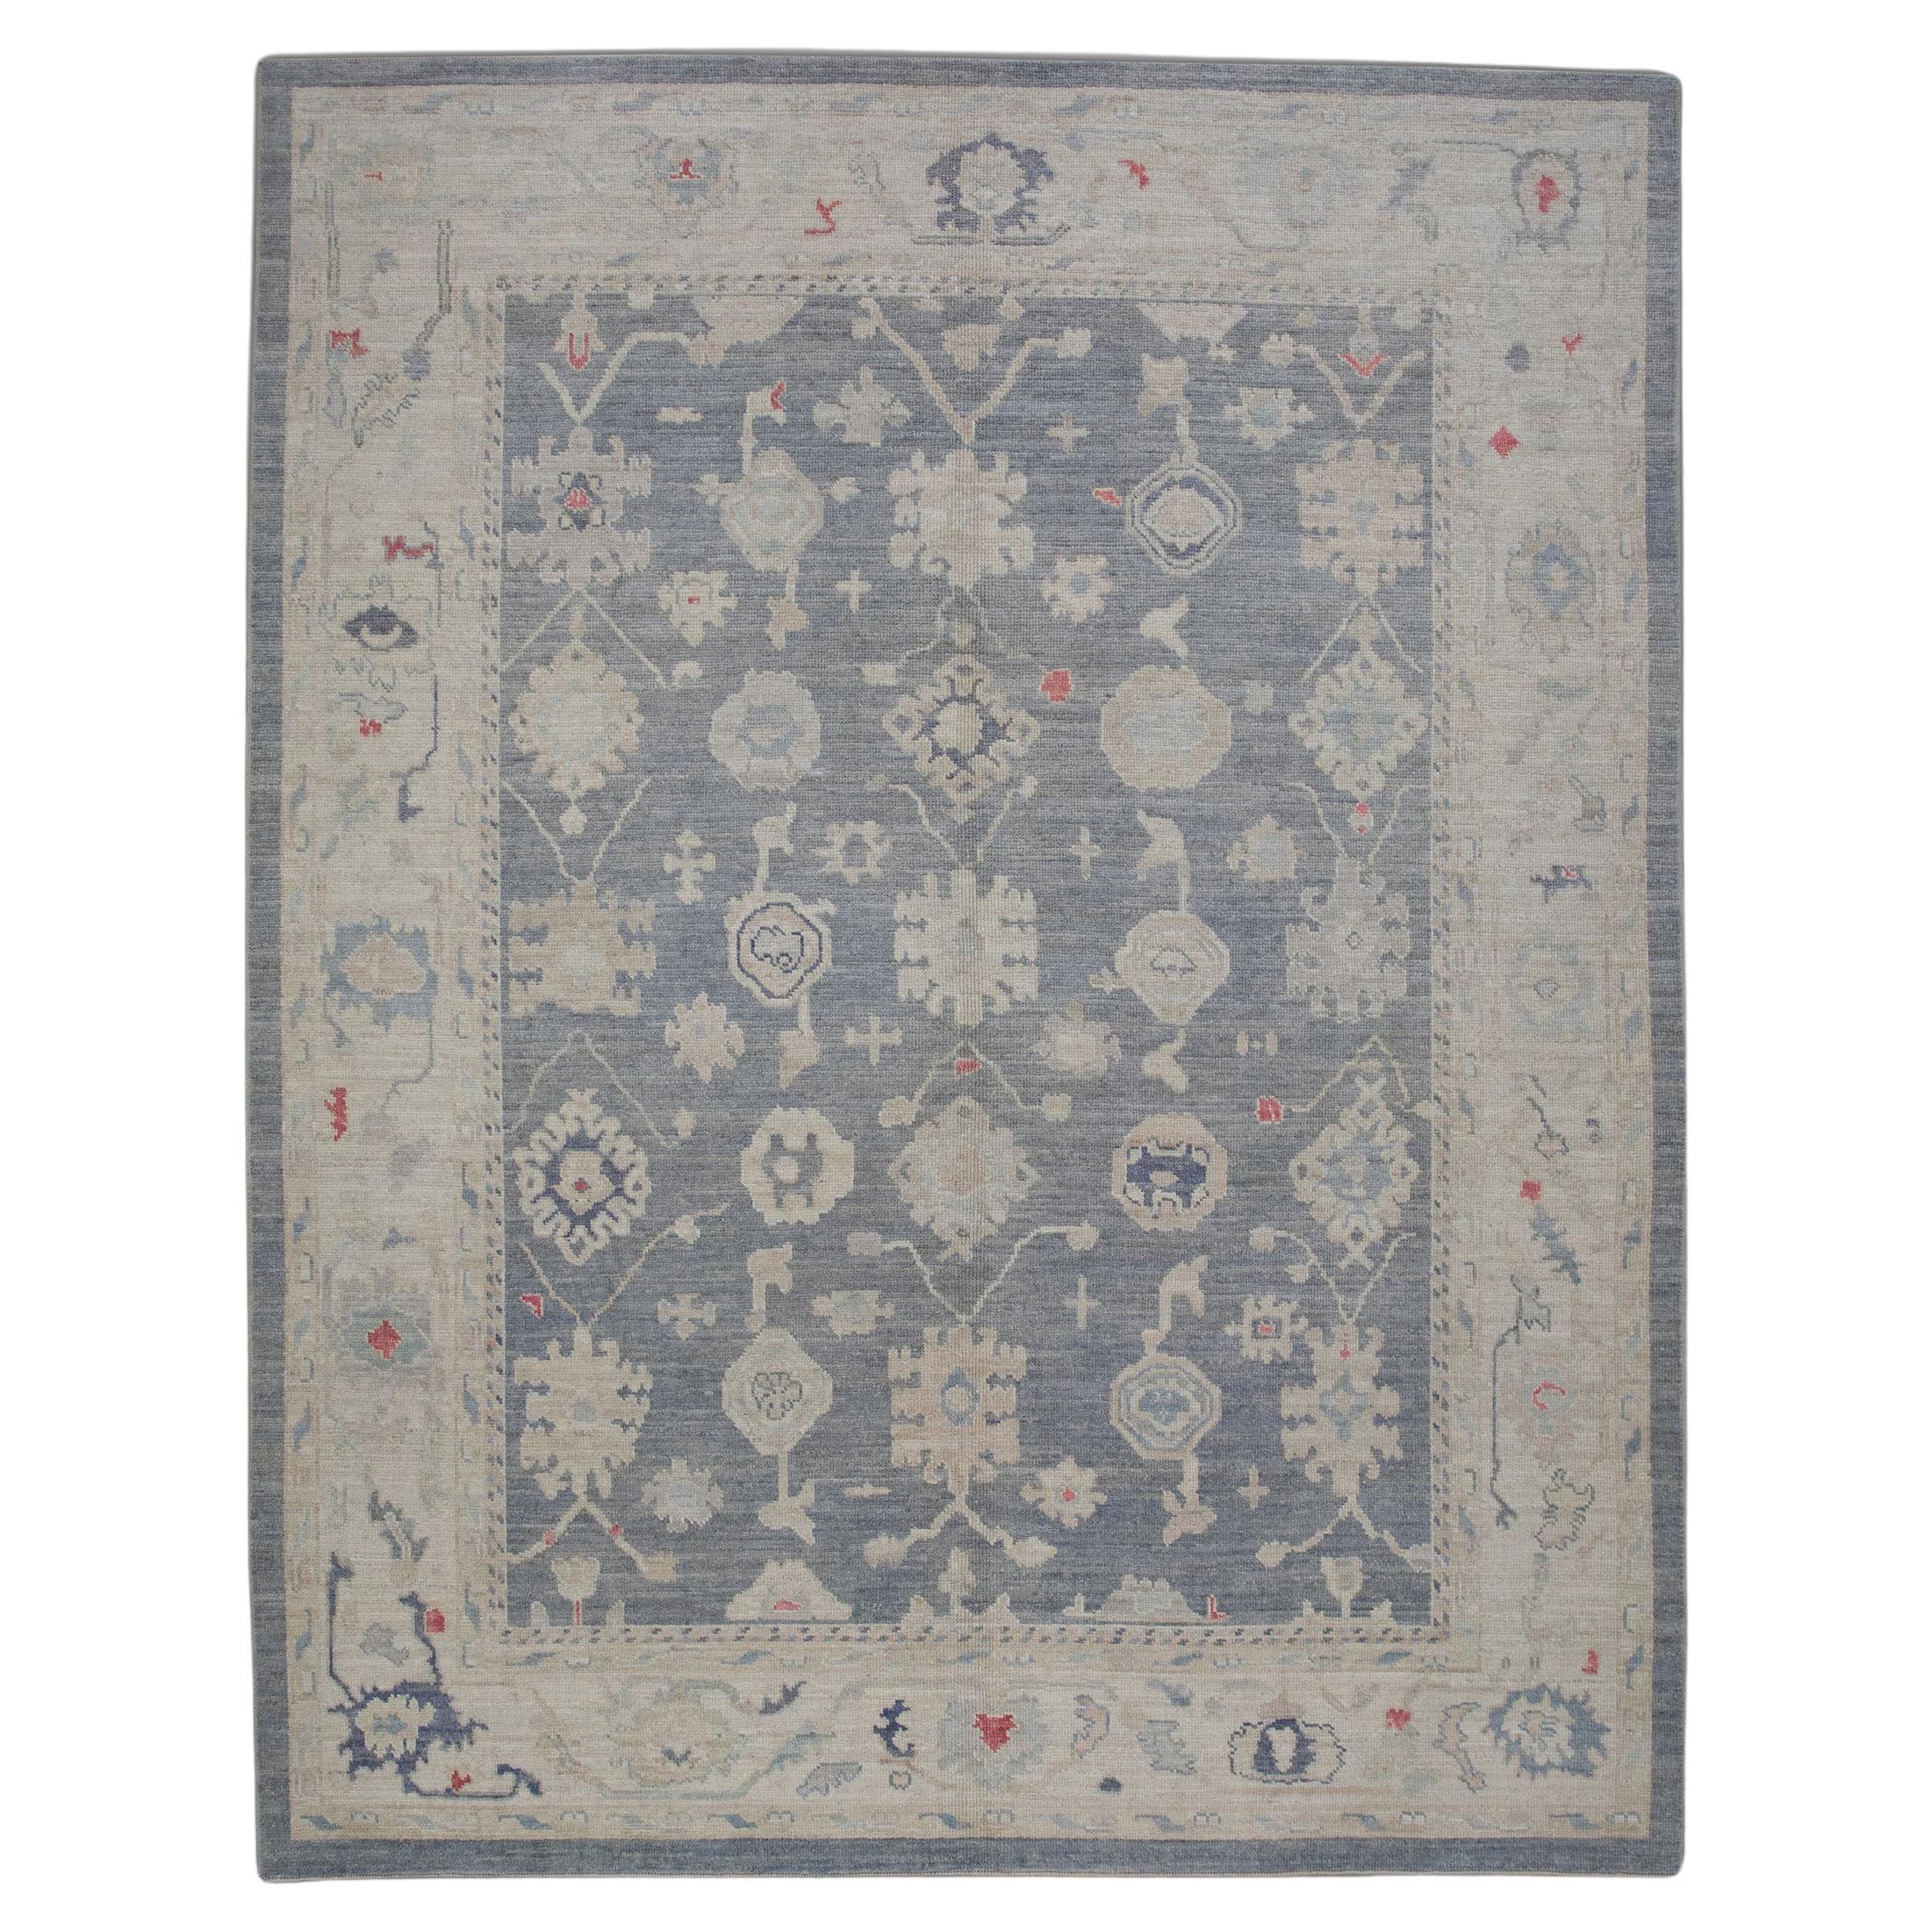 Handwoven Wool Floral Turkish Oushak Rug in Blue, Red, and Cream 8'4" x 10'3"